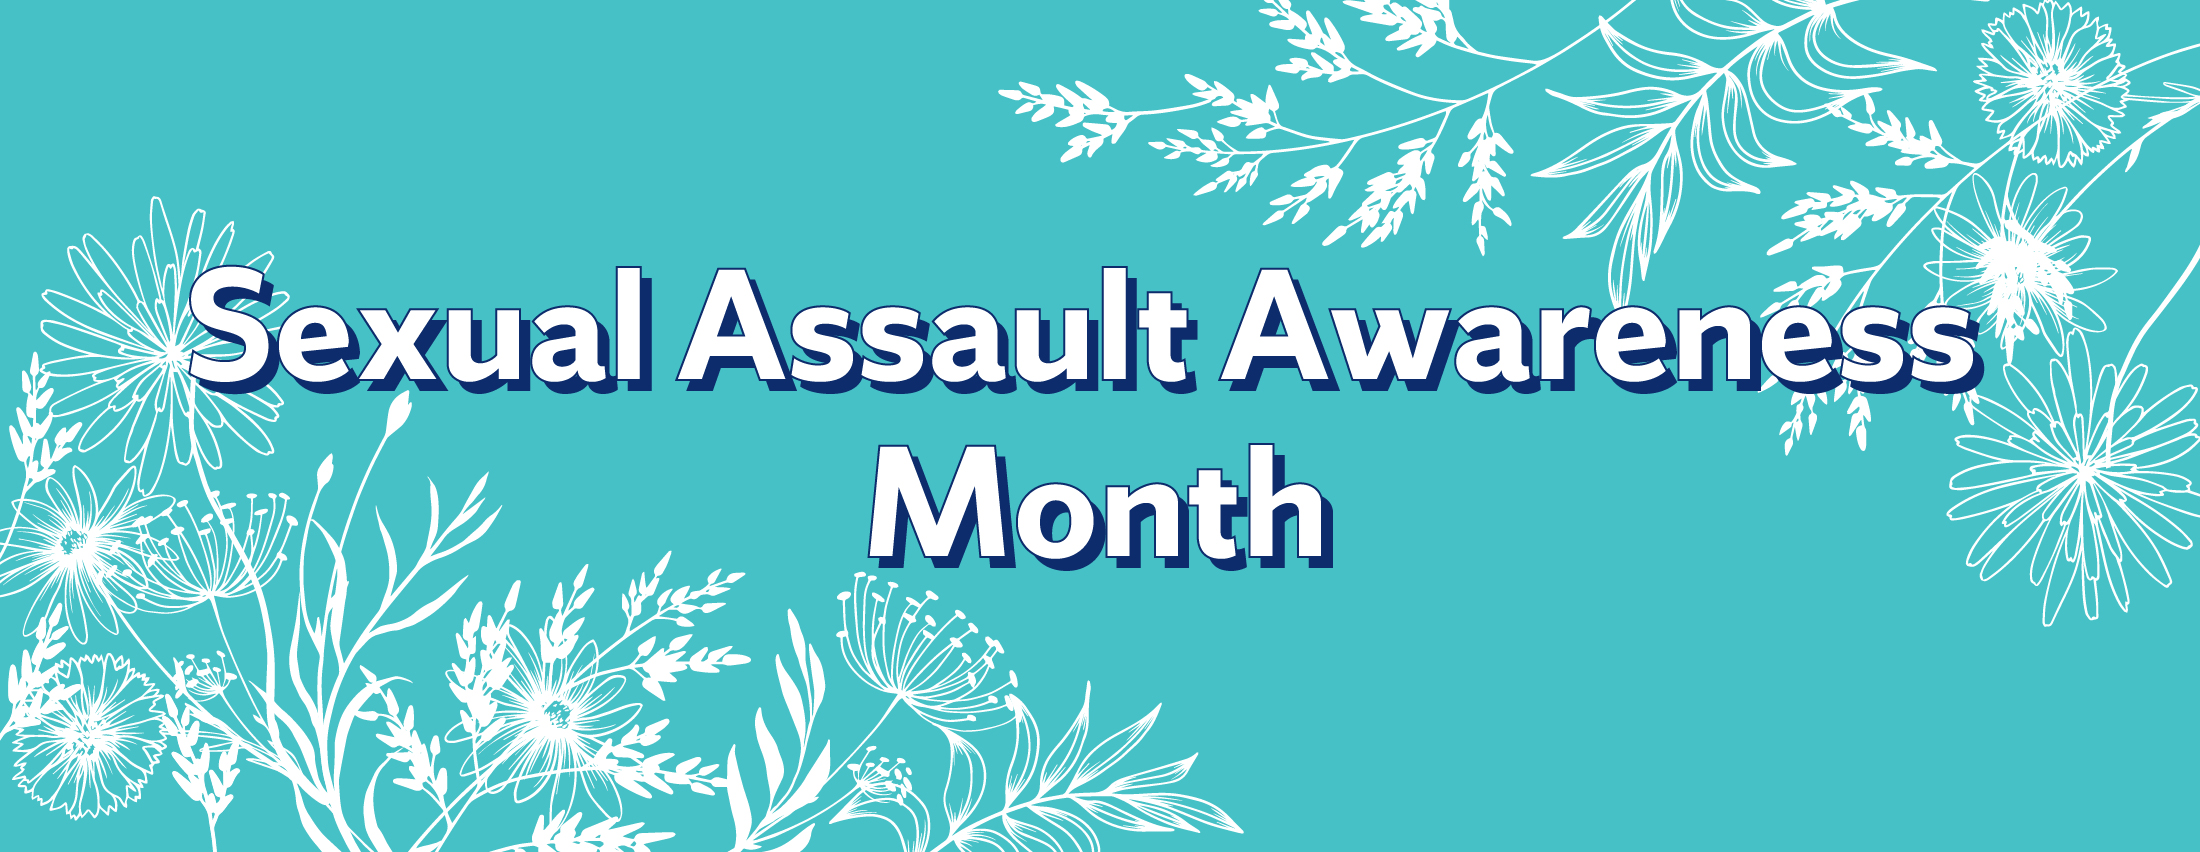 "Sexual Assault Awareness Month" written in white overtop a teal background with a white floral pattern.